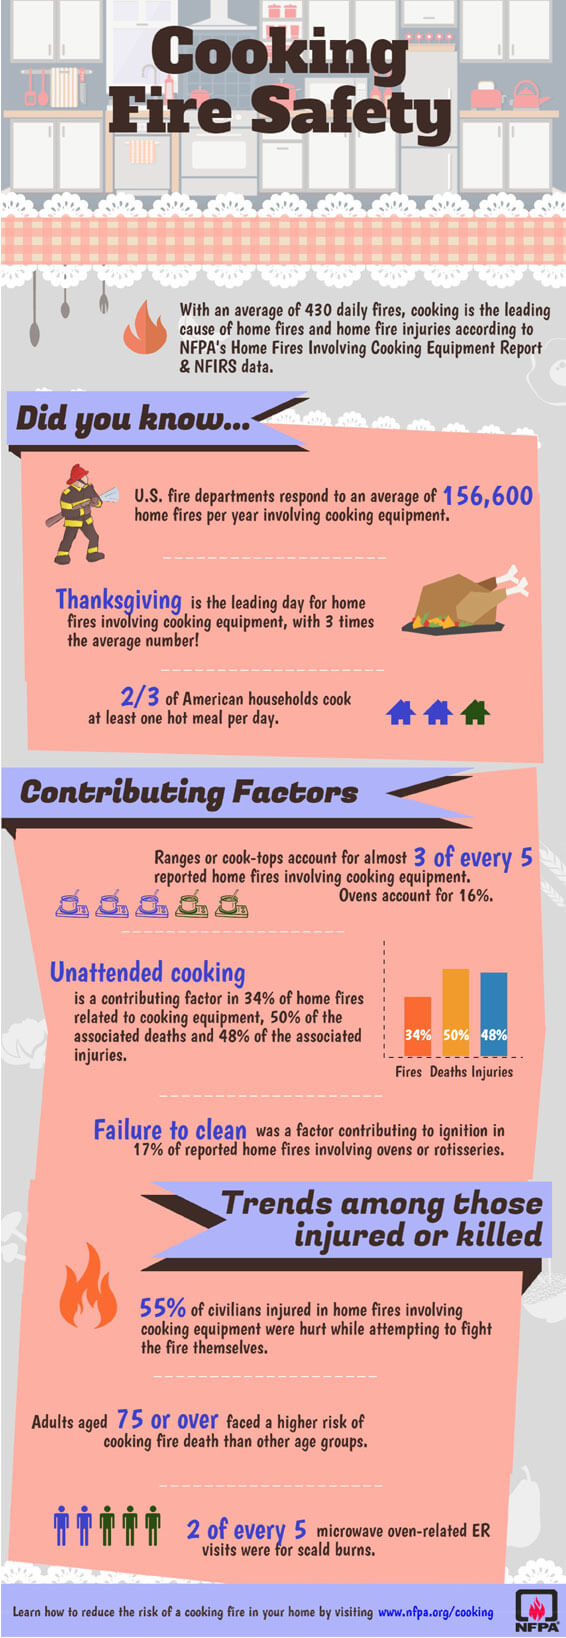 Cooking Safety Infographic NFPA